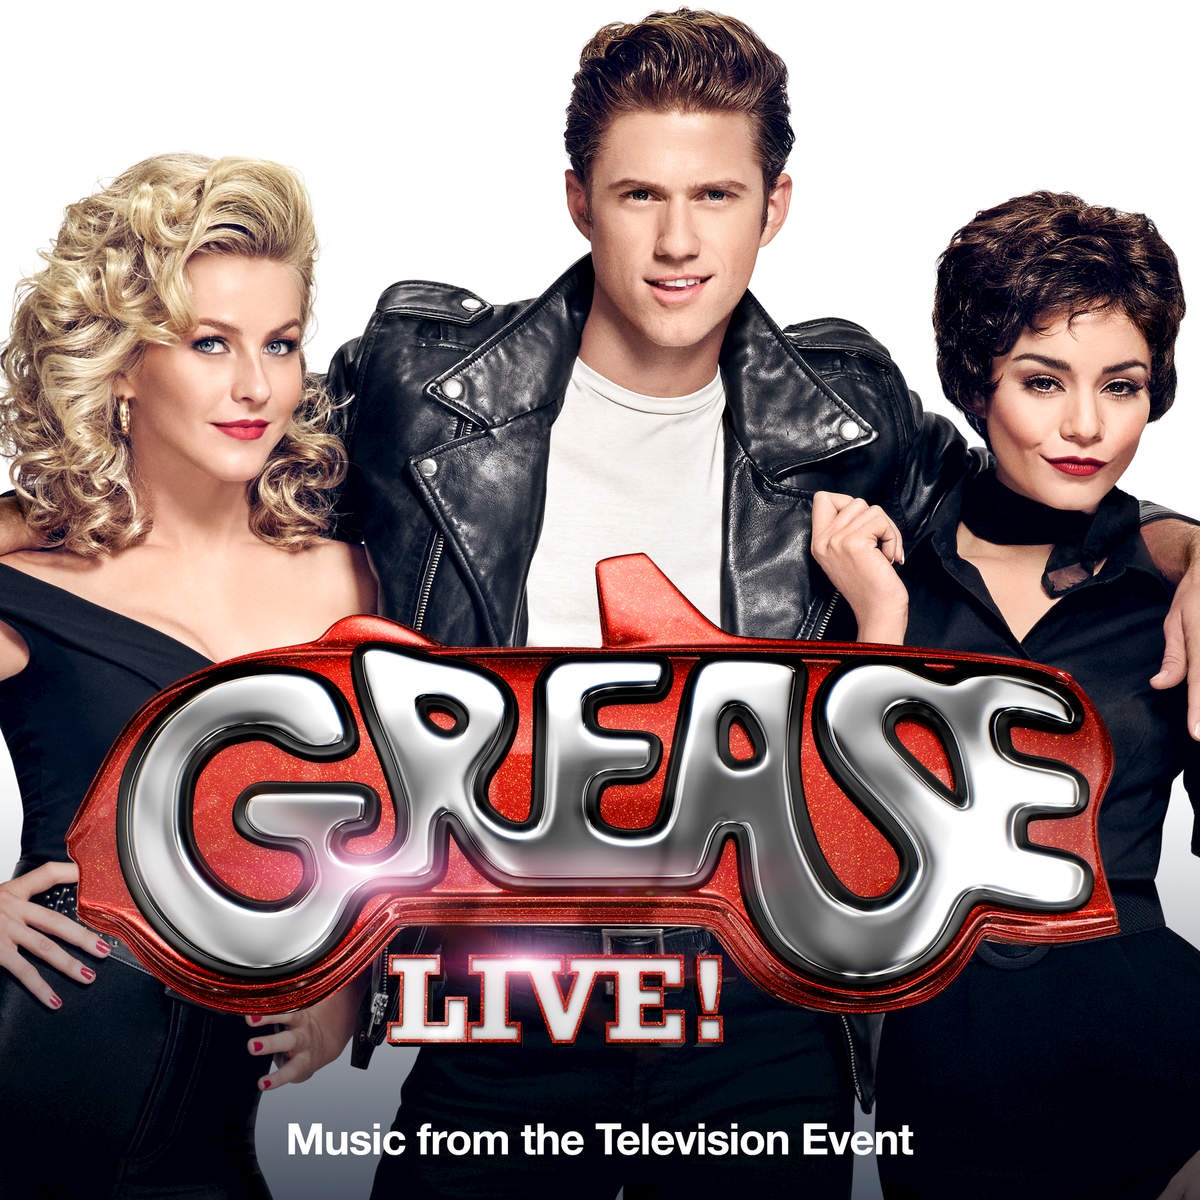 You're The One That I Want - From "Grease Live!" Music From The Television Event